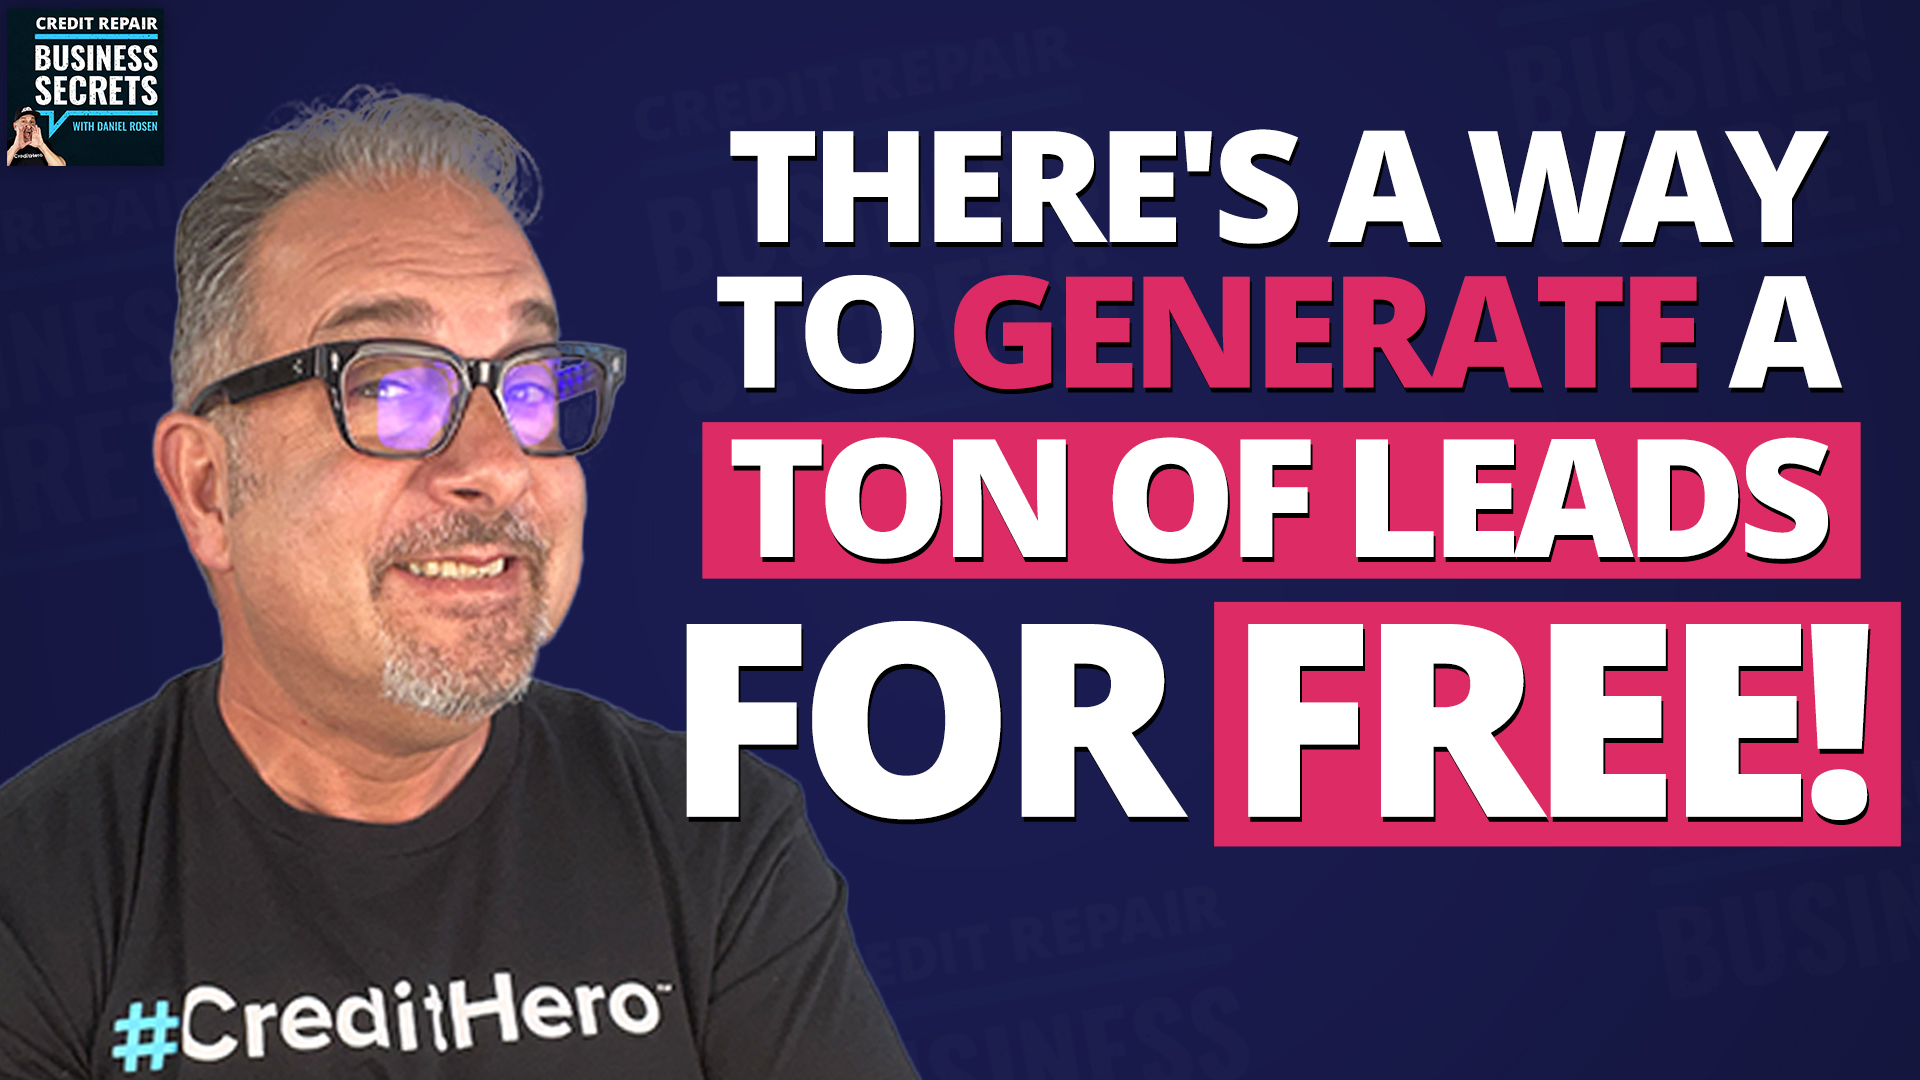 How to Generate a Ton of Leads for FREE with Creative Thinking!